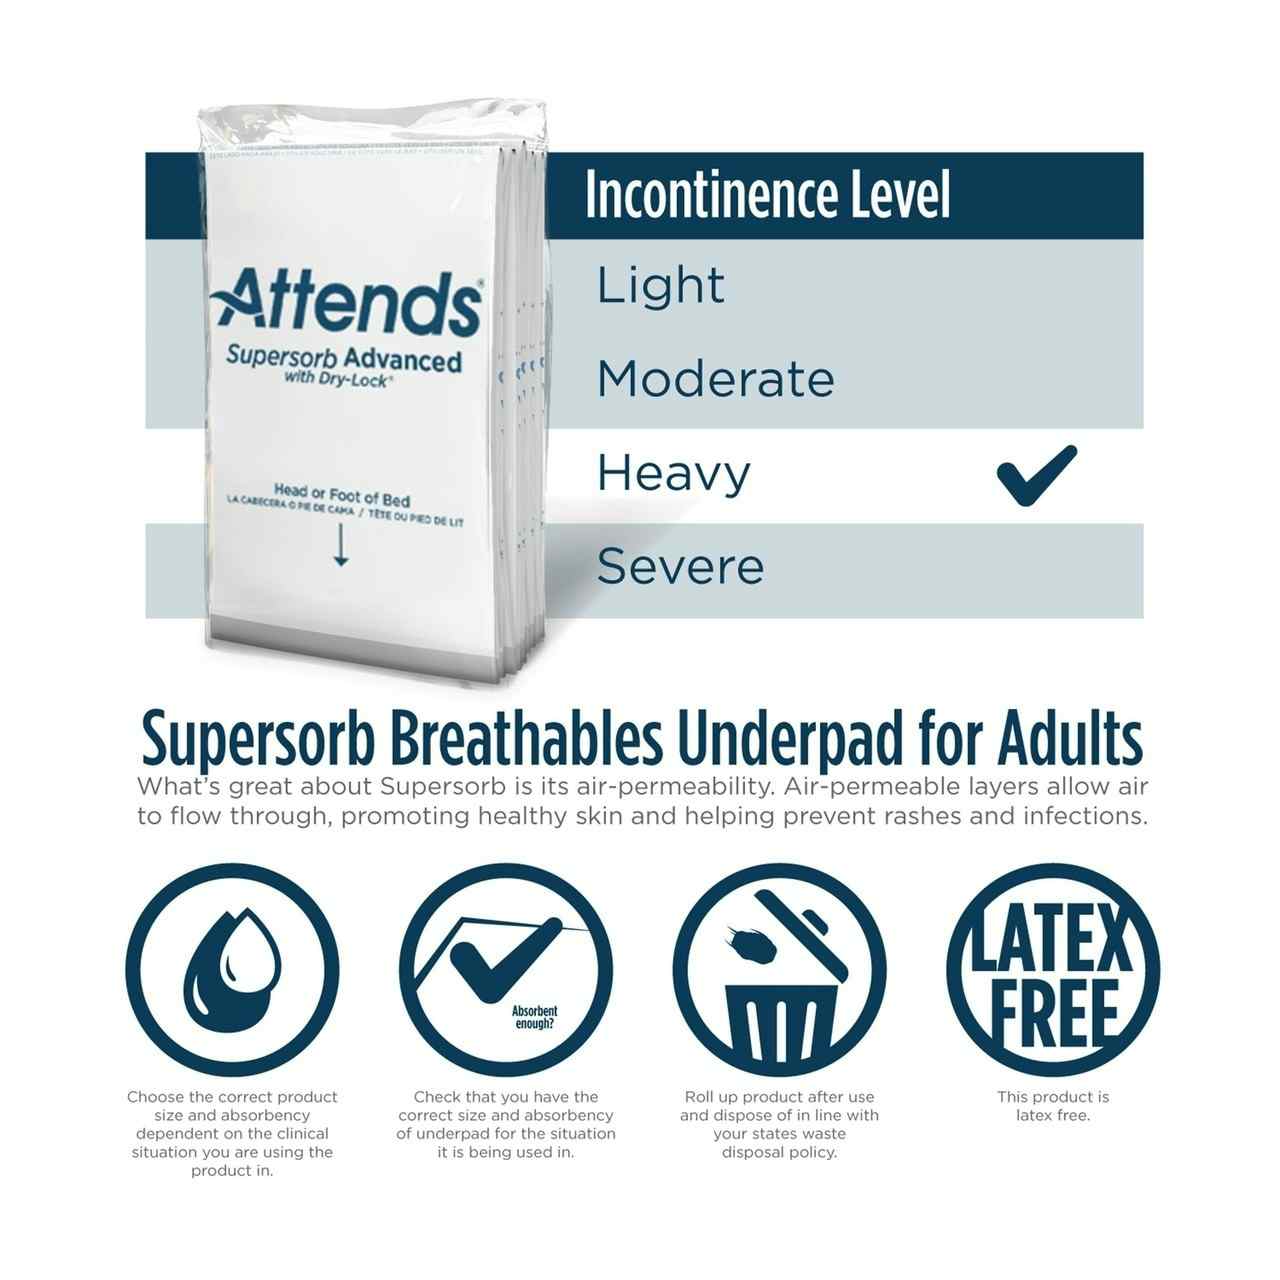 Attends Supersorb Advanced Underpads, Absorbency comparison